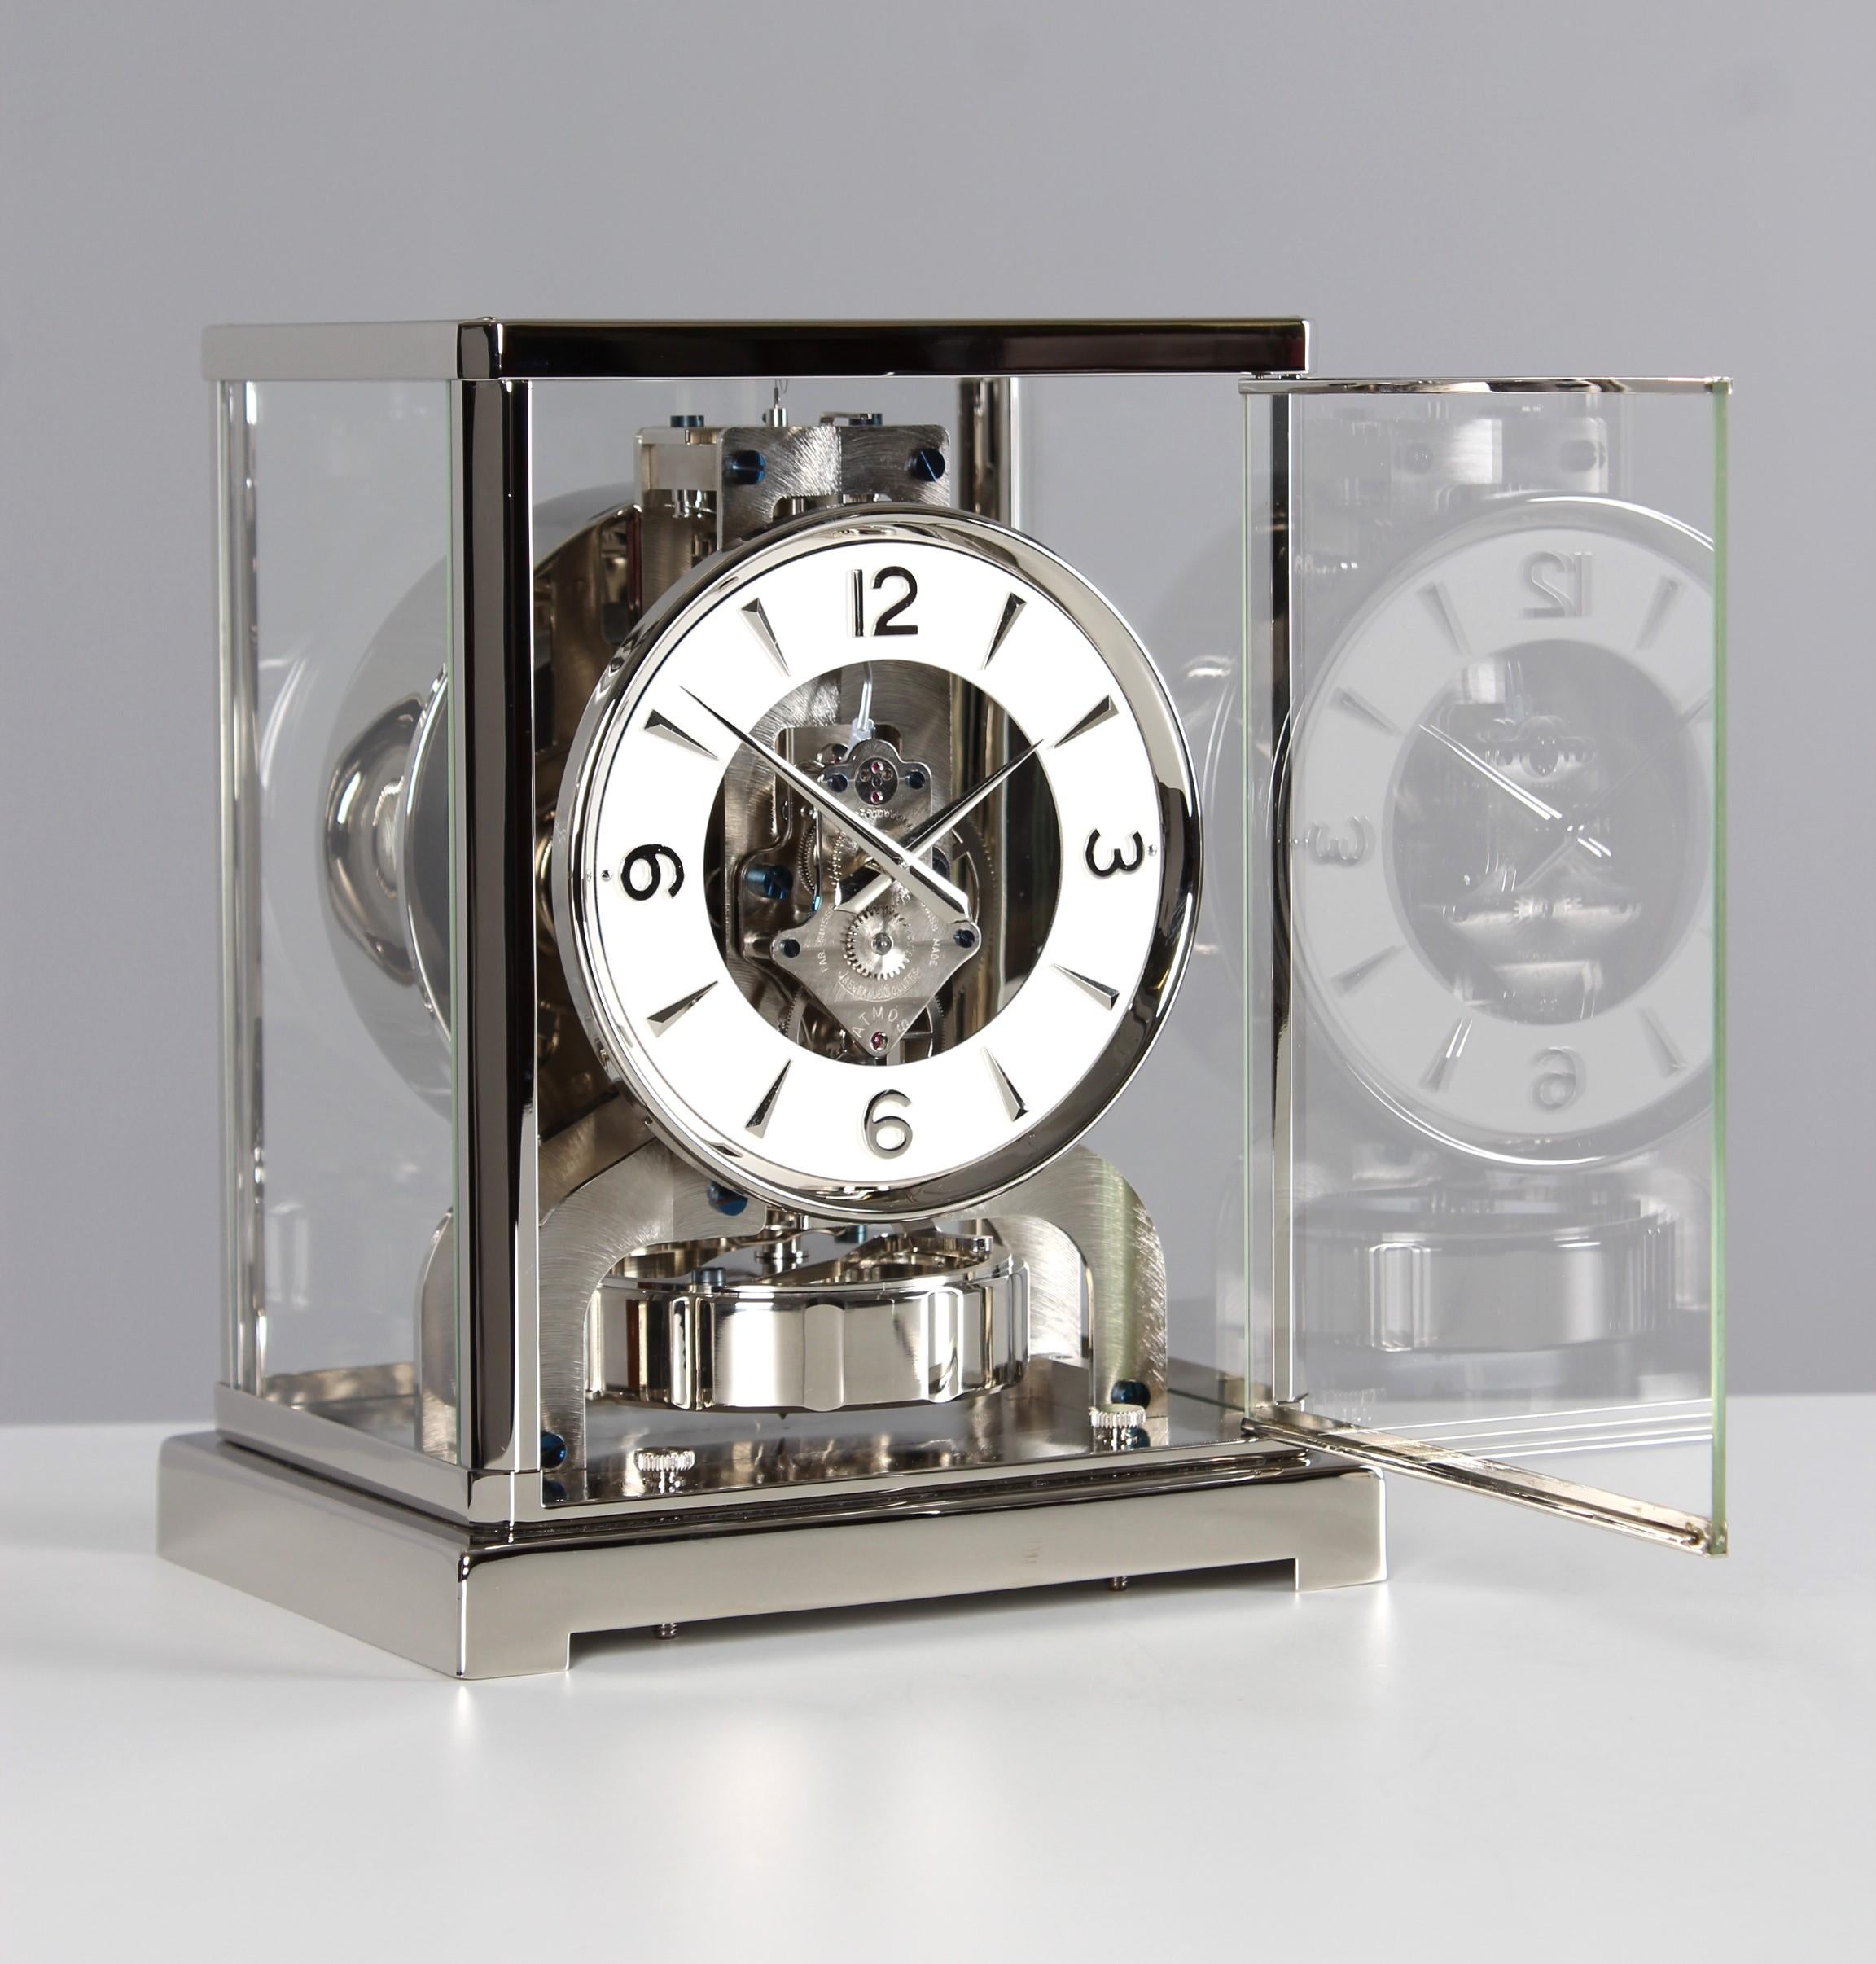 Silver Atmos clock

Dimensions: H x W x D: 22 x 18 x 13.5 cm

Description:
Atmos V caliber 526 in nickel-plated case.
White dial ring with silver numerals. As usual on the early models with horizontal 3 and 9. The blued screws are also typical of